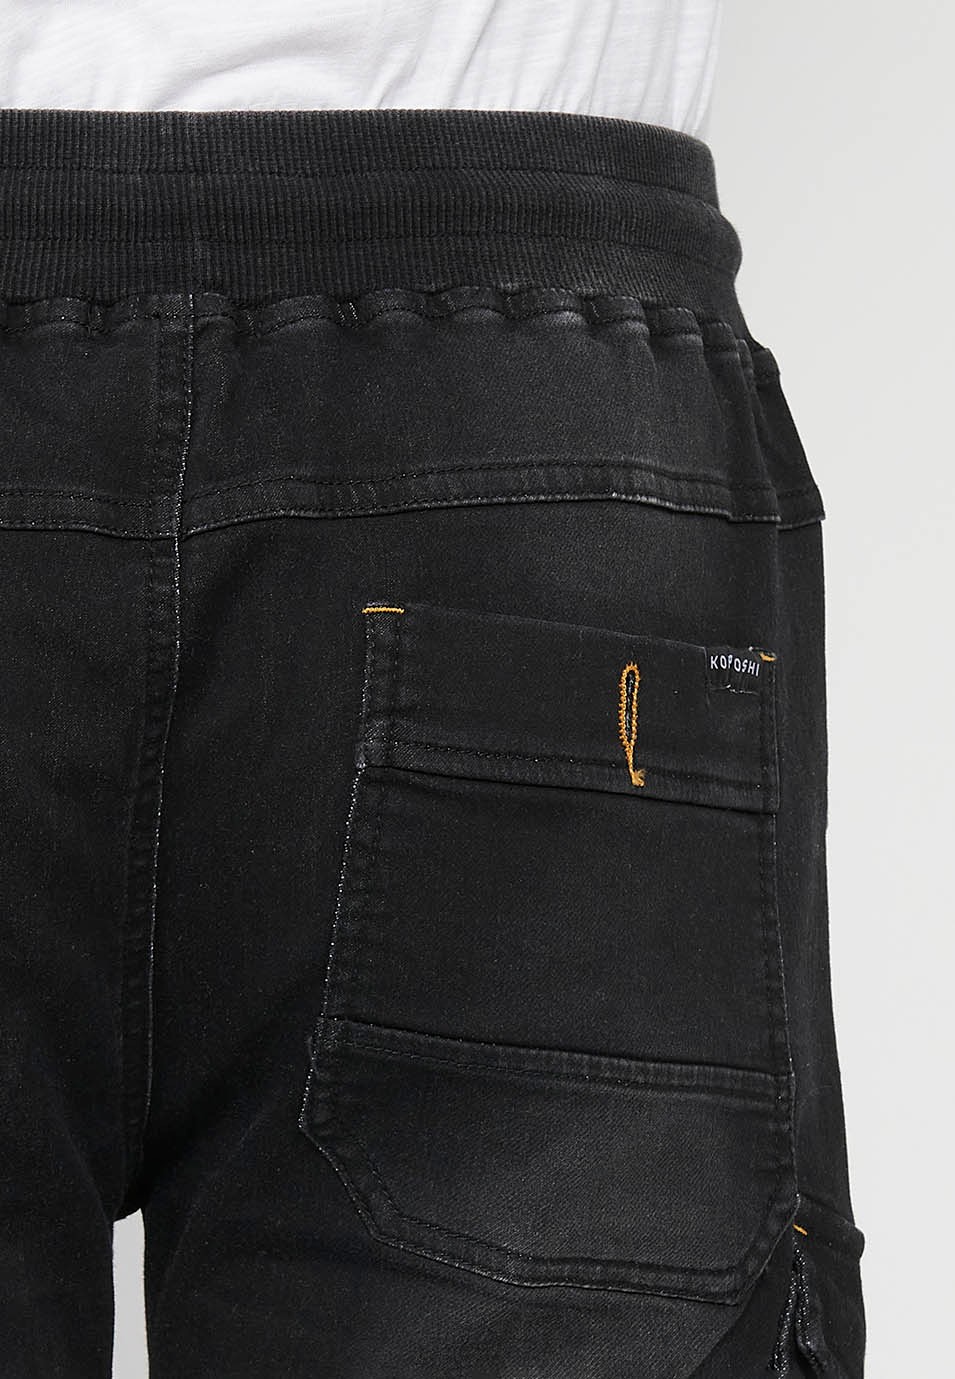 Denim Bermuda cargo jogger shorts finished with a turn-up, Adjustable waist with elastic and drawstring, Side pockets with flap, Black for Men 5